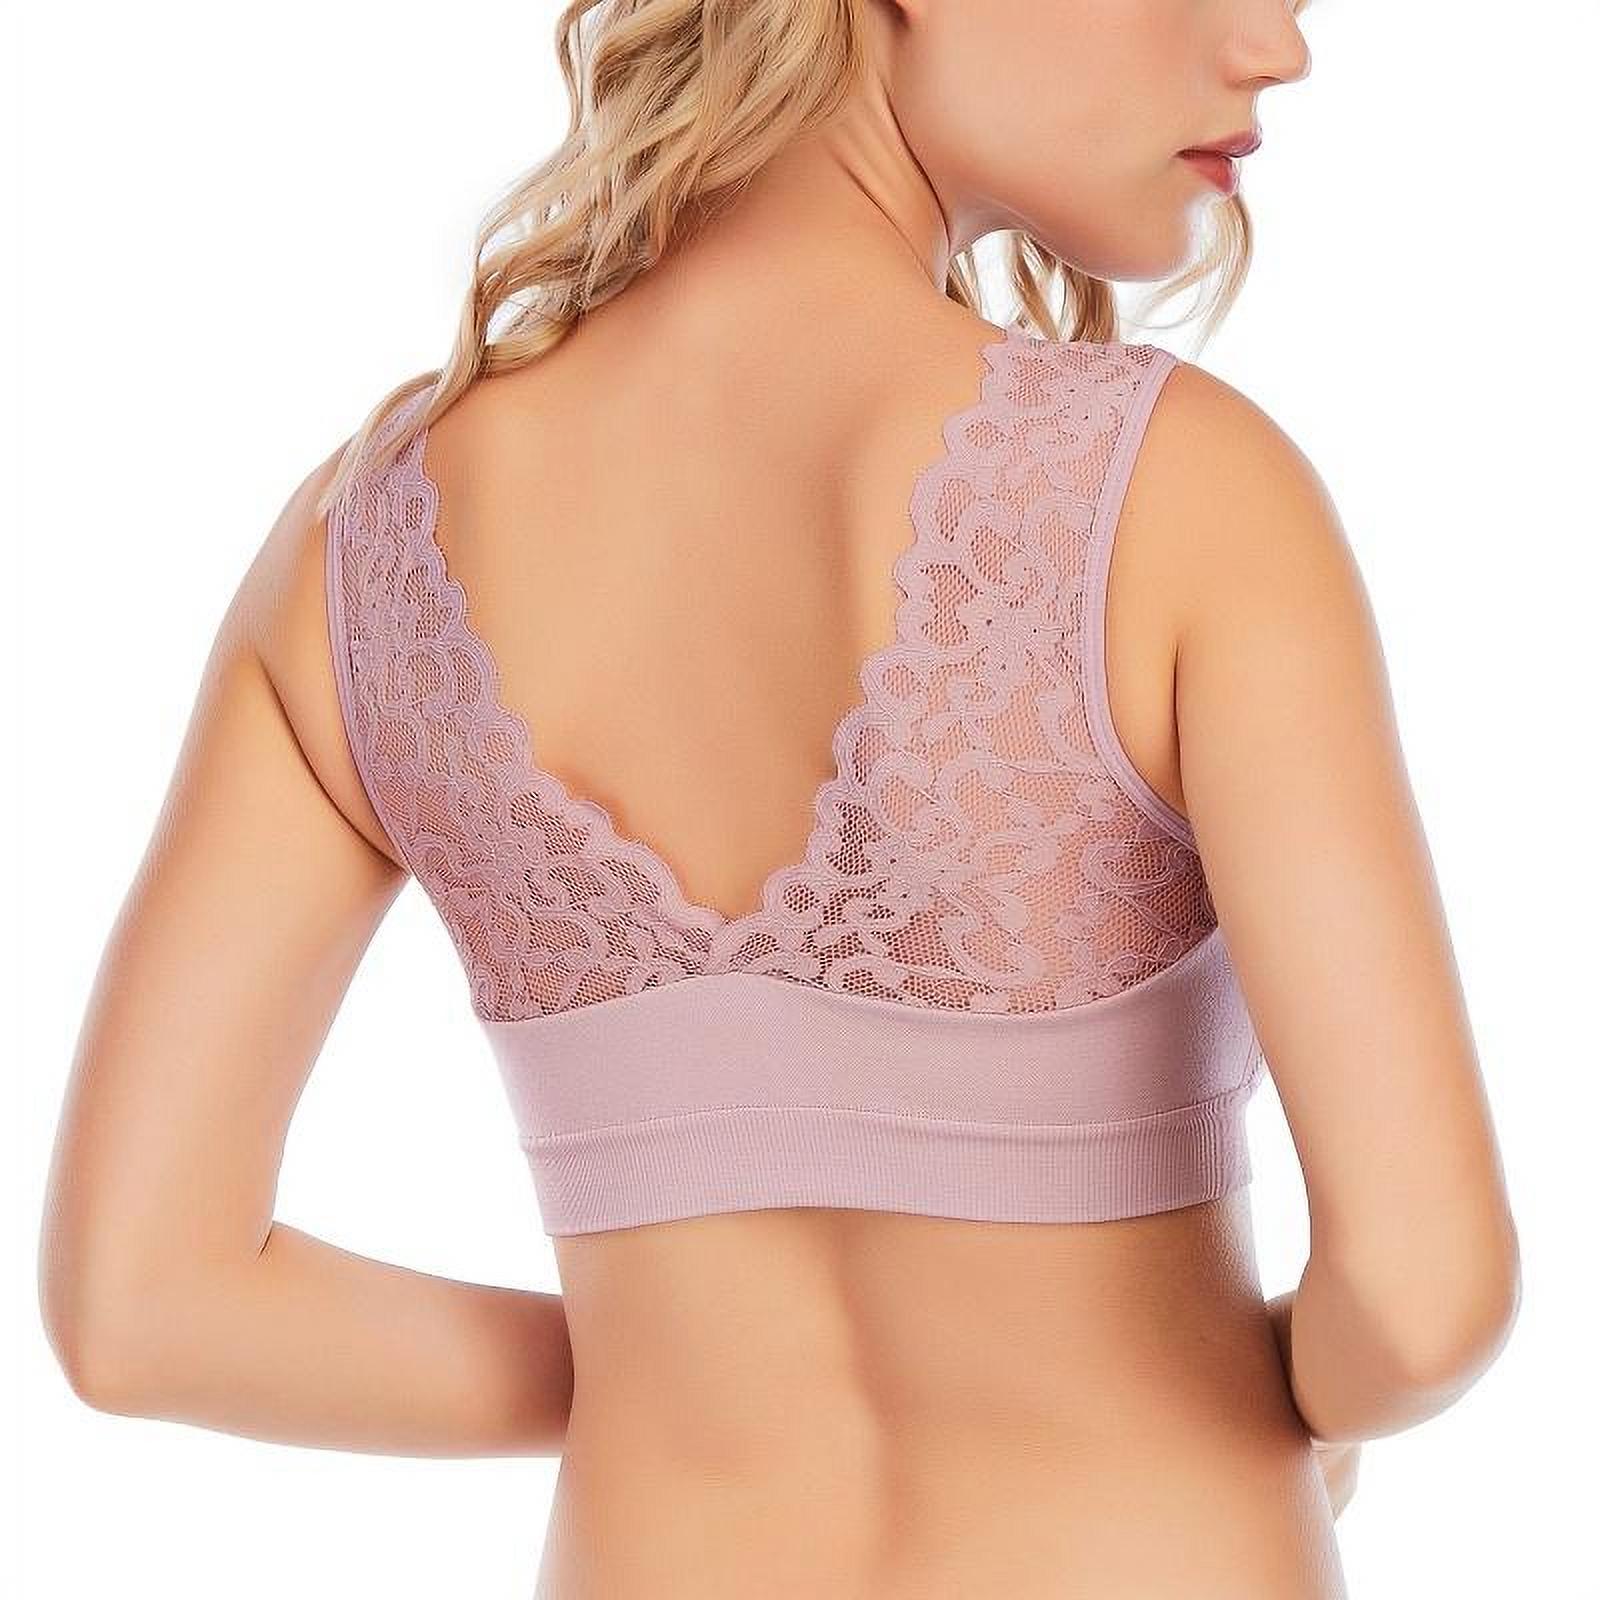 Sexy V Neck Lace Bras For Women, Brassiere Push Up Padded Bra Seamless Comfort Bralette, Breathable Fitness Gym Bra Large Size, Pink, 2XL - image 4 of 13